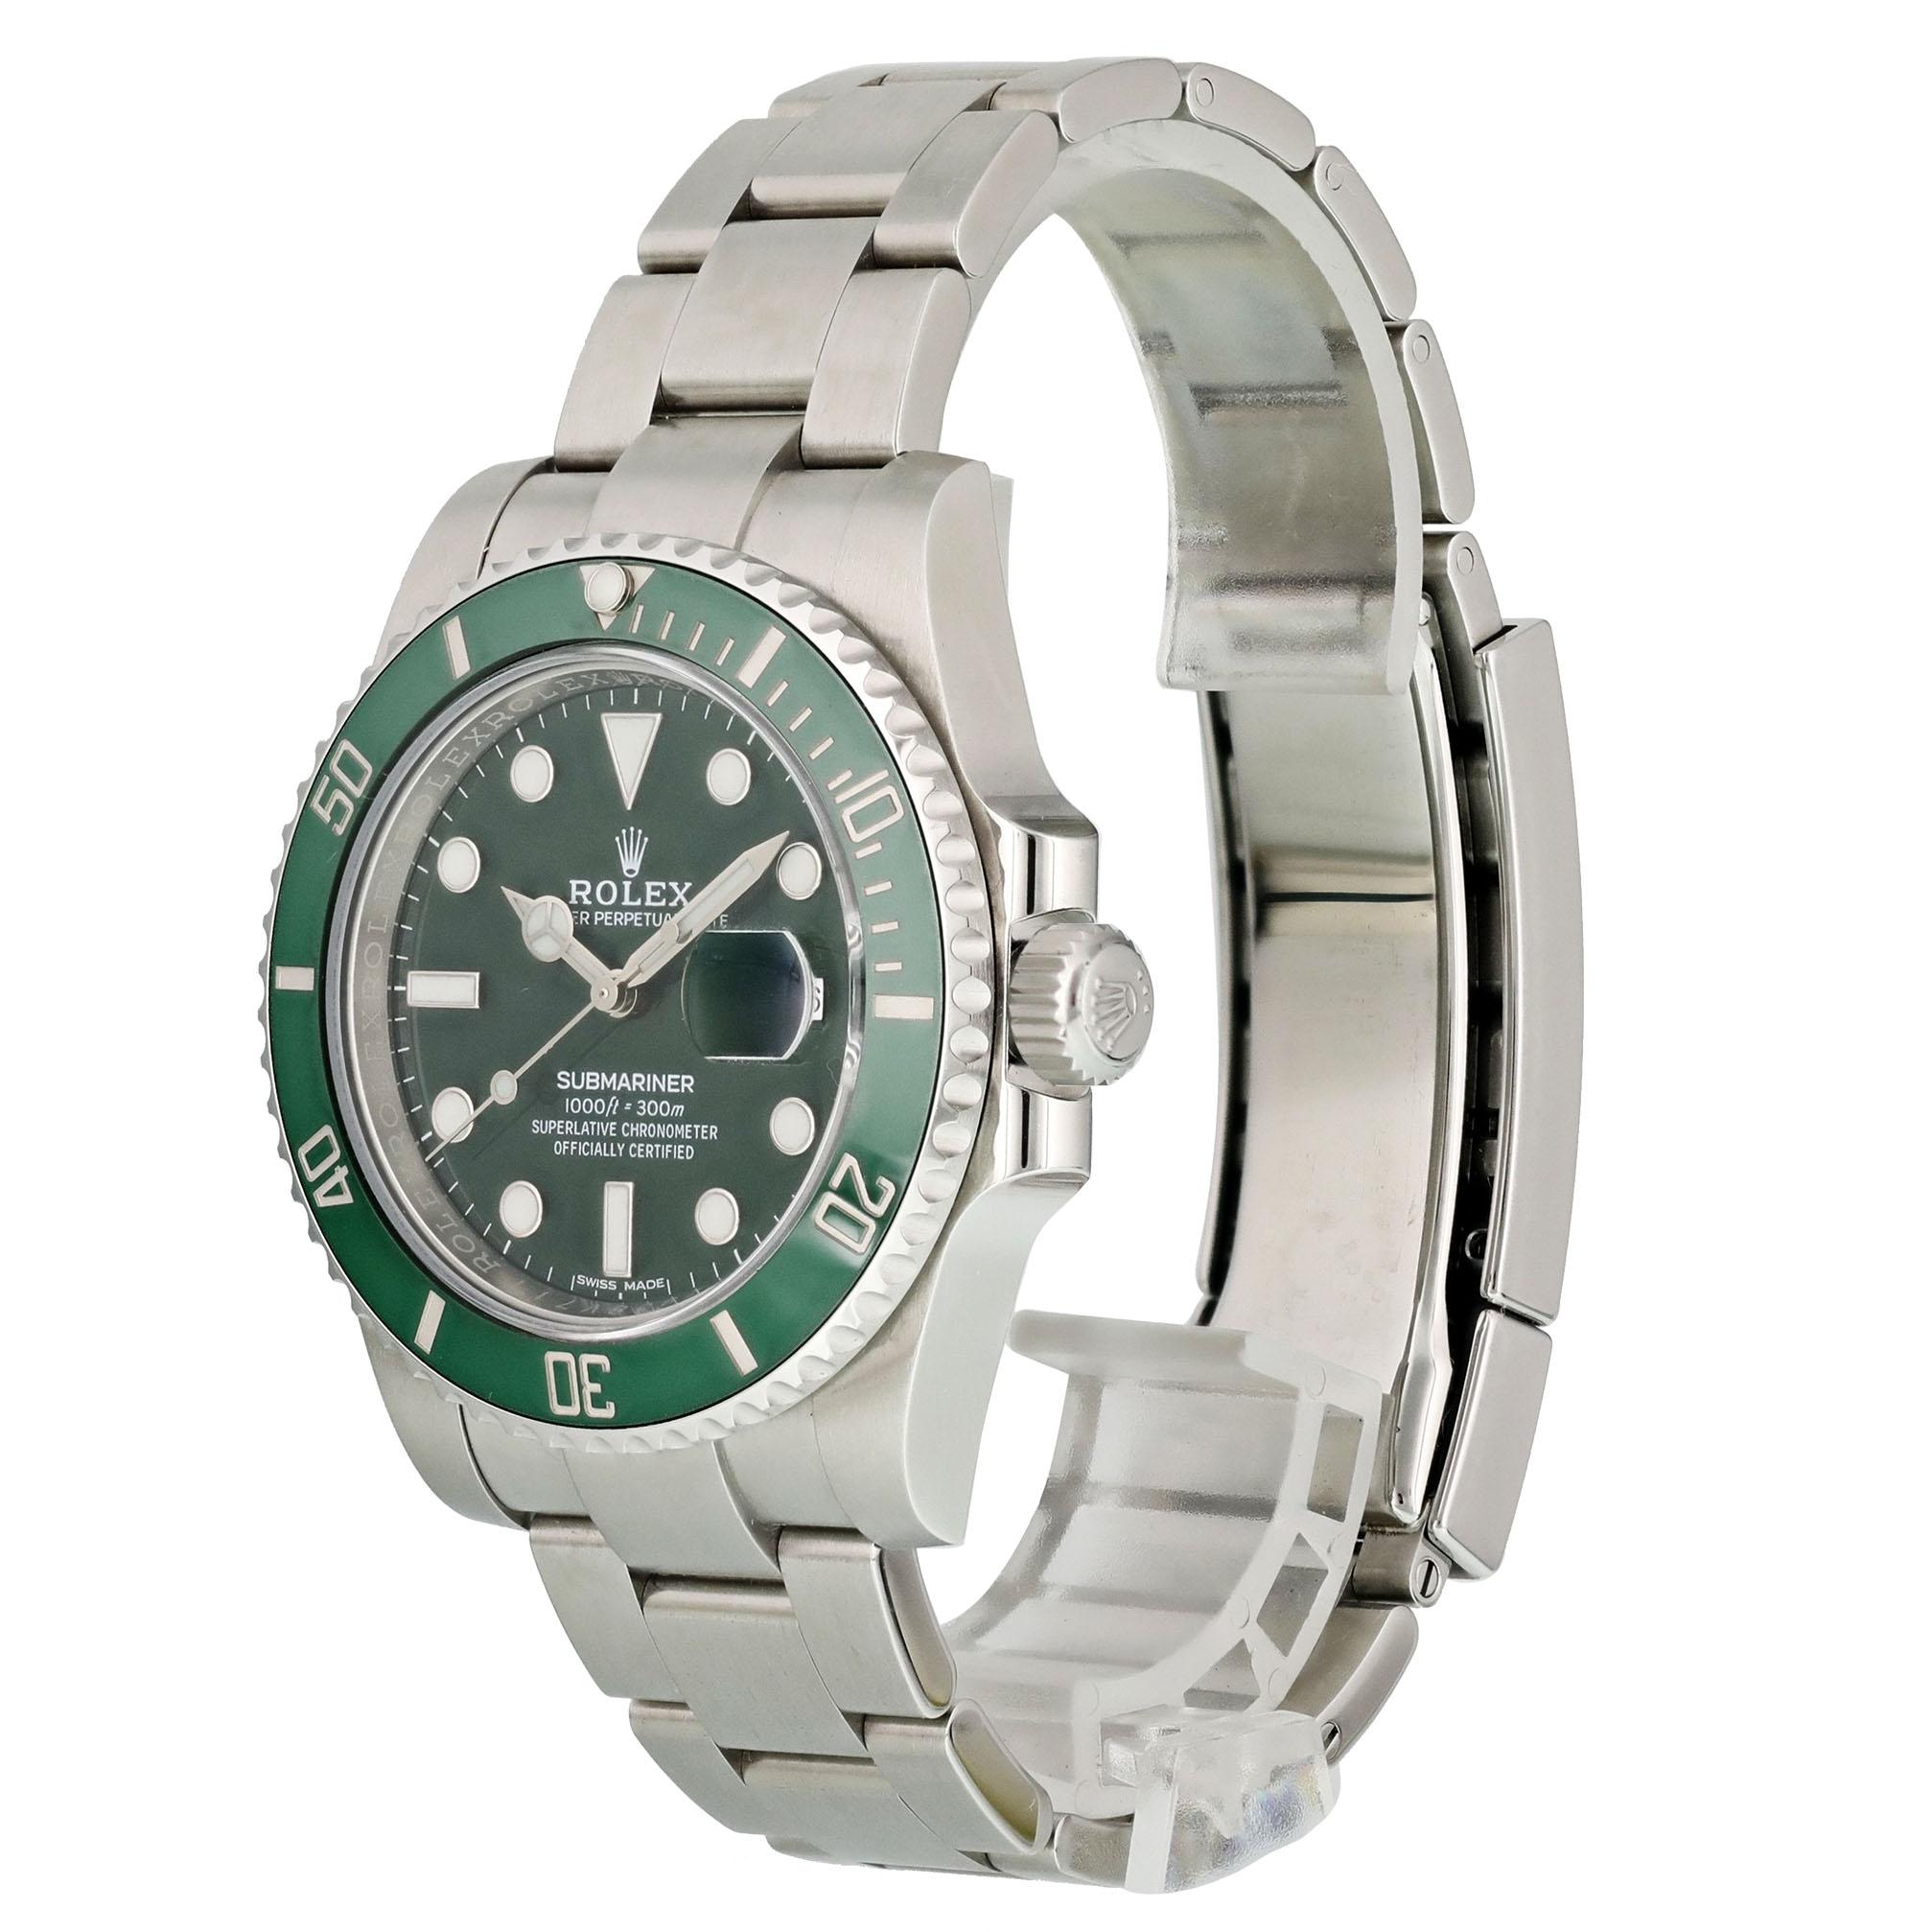 Rolex Submariner Hulk 116610lV Men Watch. 
40mm Stainless Steel case. 
Stainless Steel Unidirectional bezel with green ceramic bezel insert. 
Green dial with Luminous Steel hands and index, dot hour markers. 
Minute markers on the outer dial. 
Date